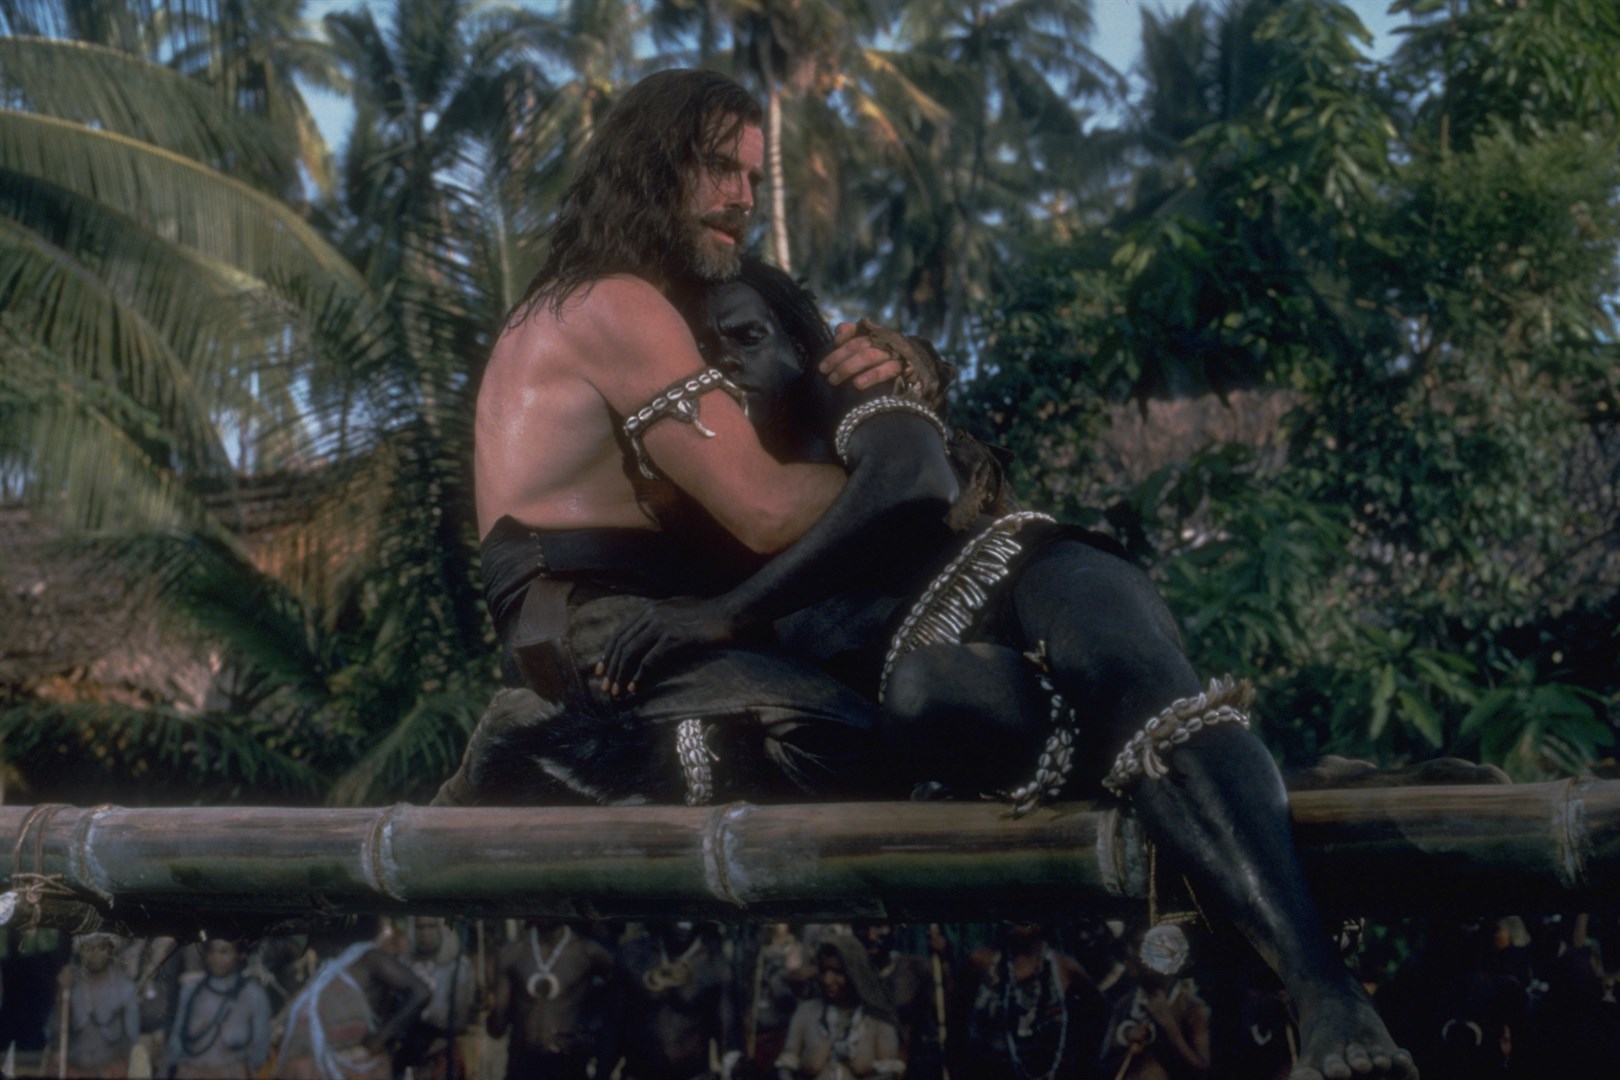 A film still from the 1997 adaptation of Robinson Crusoe. Crusoe, a white man, cradles Friday, a dark-skinned Black man after rescuing him from cannibals.